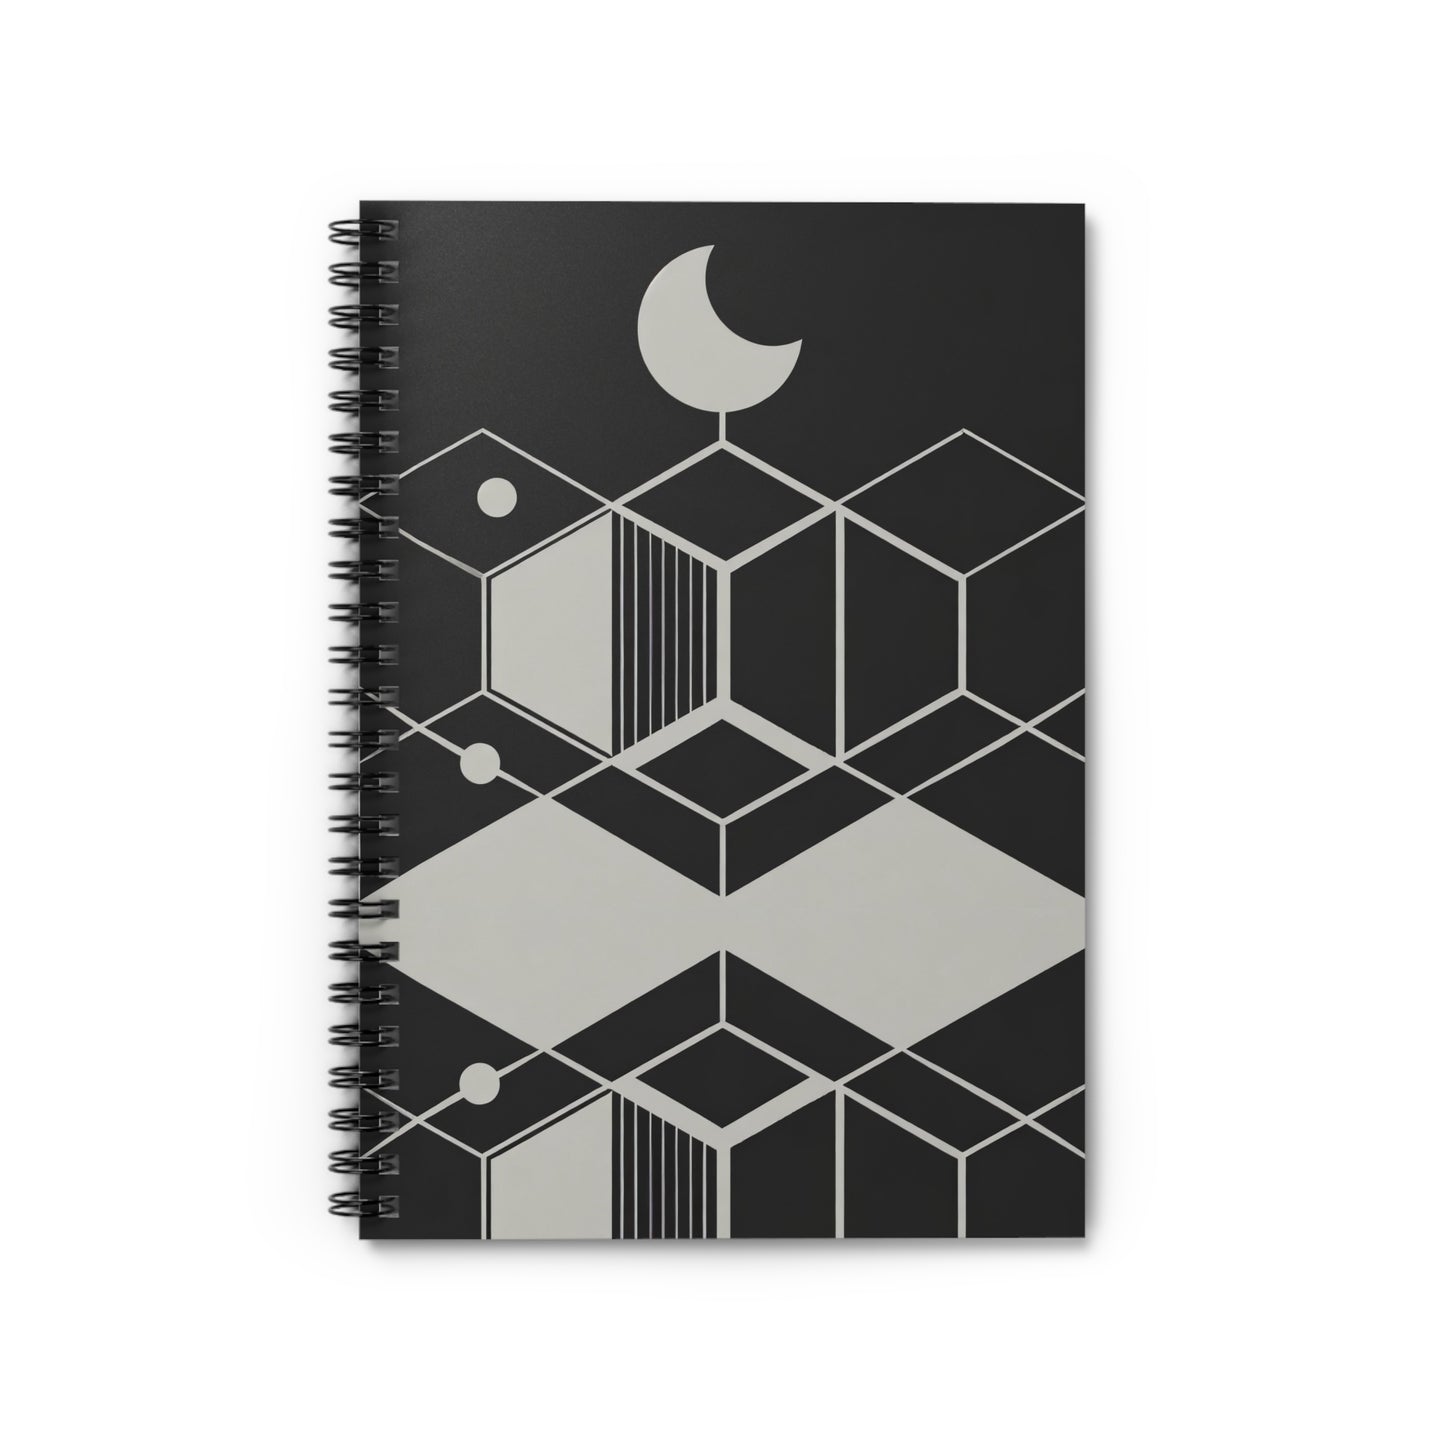 Minimalist Geometric Cosmic Abstract Spiral Notebook - Ruled Line